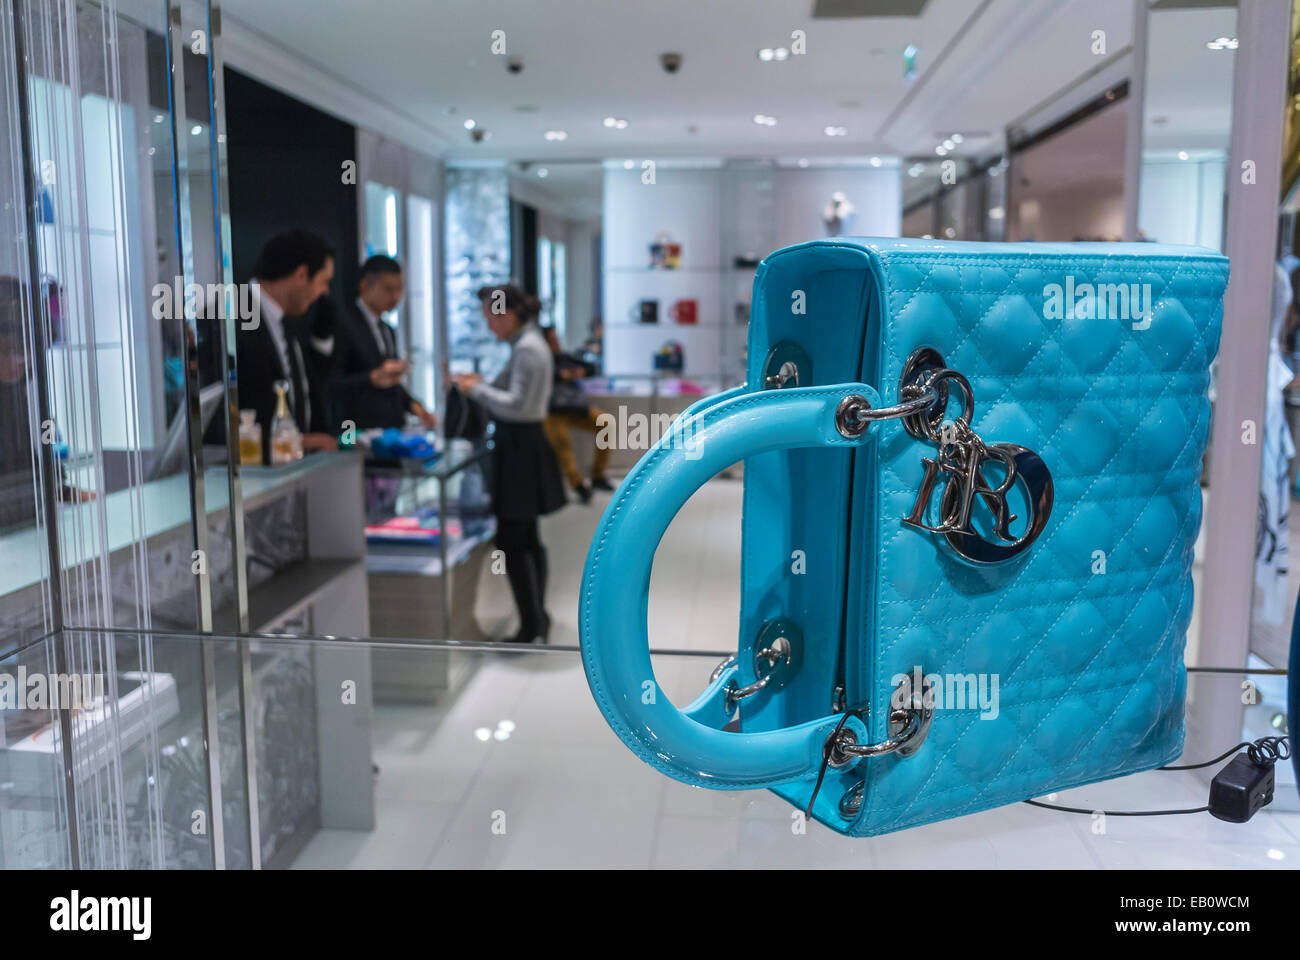 Paris, France, Chinese Woman, Shopping inside French Department Store, Le Printemps Christian Dior Store Window Display, Luxury Handbag, fashion designer Stock Photo